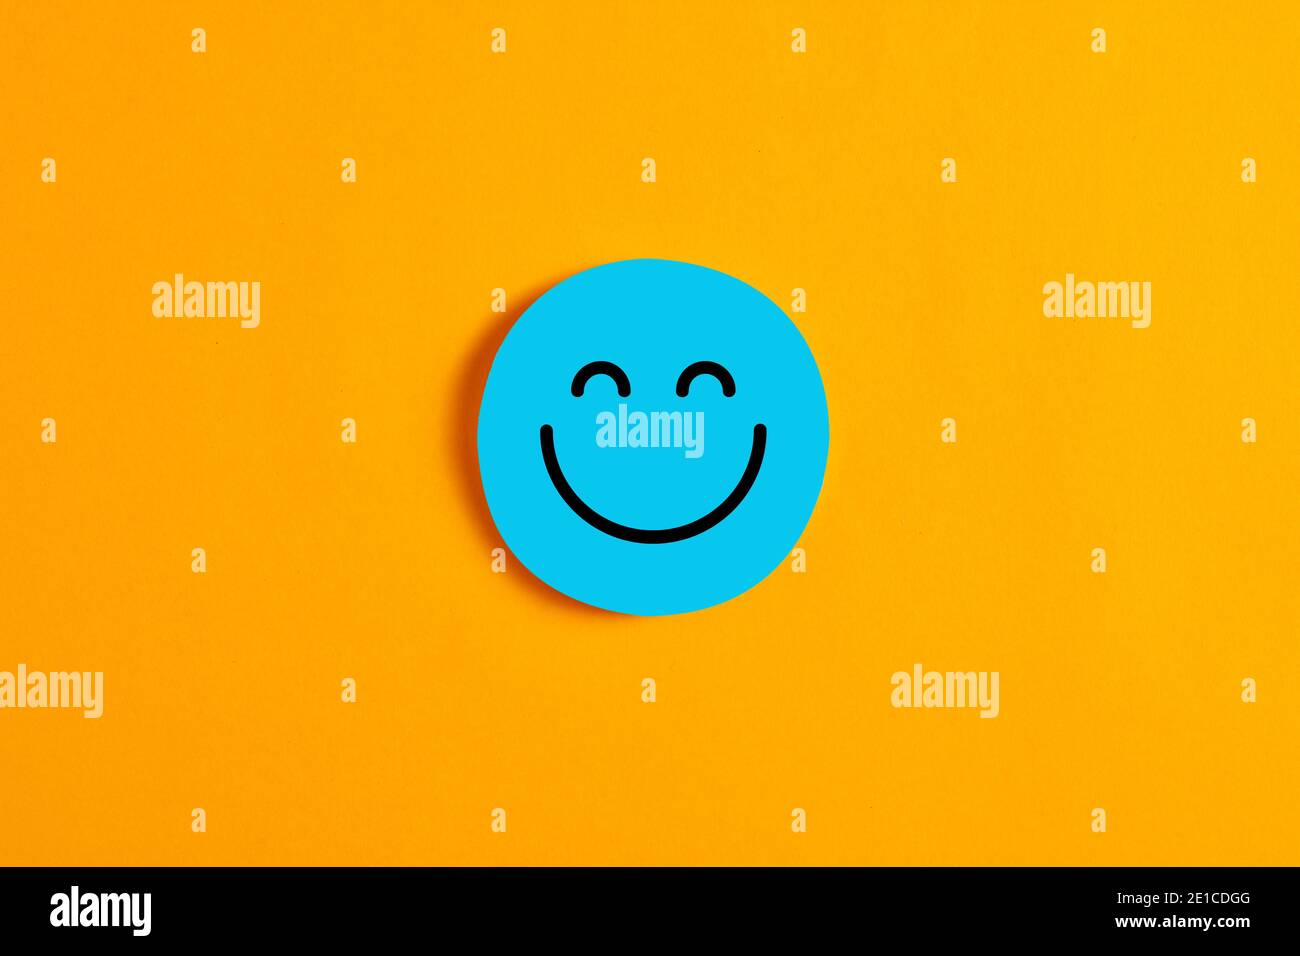 Blue round circle with a happy or smiley face icon on it against yellow background. Positive expression or customer satisfaction in business concept. Stock Photo